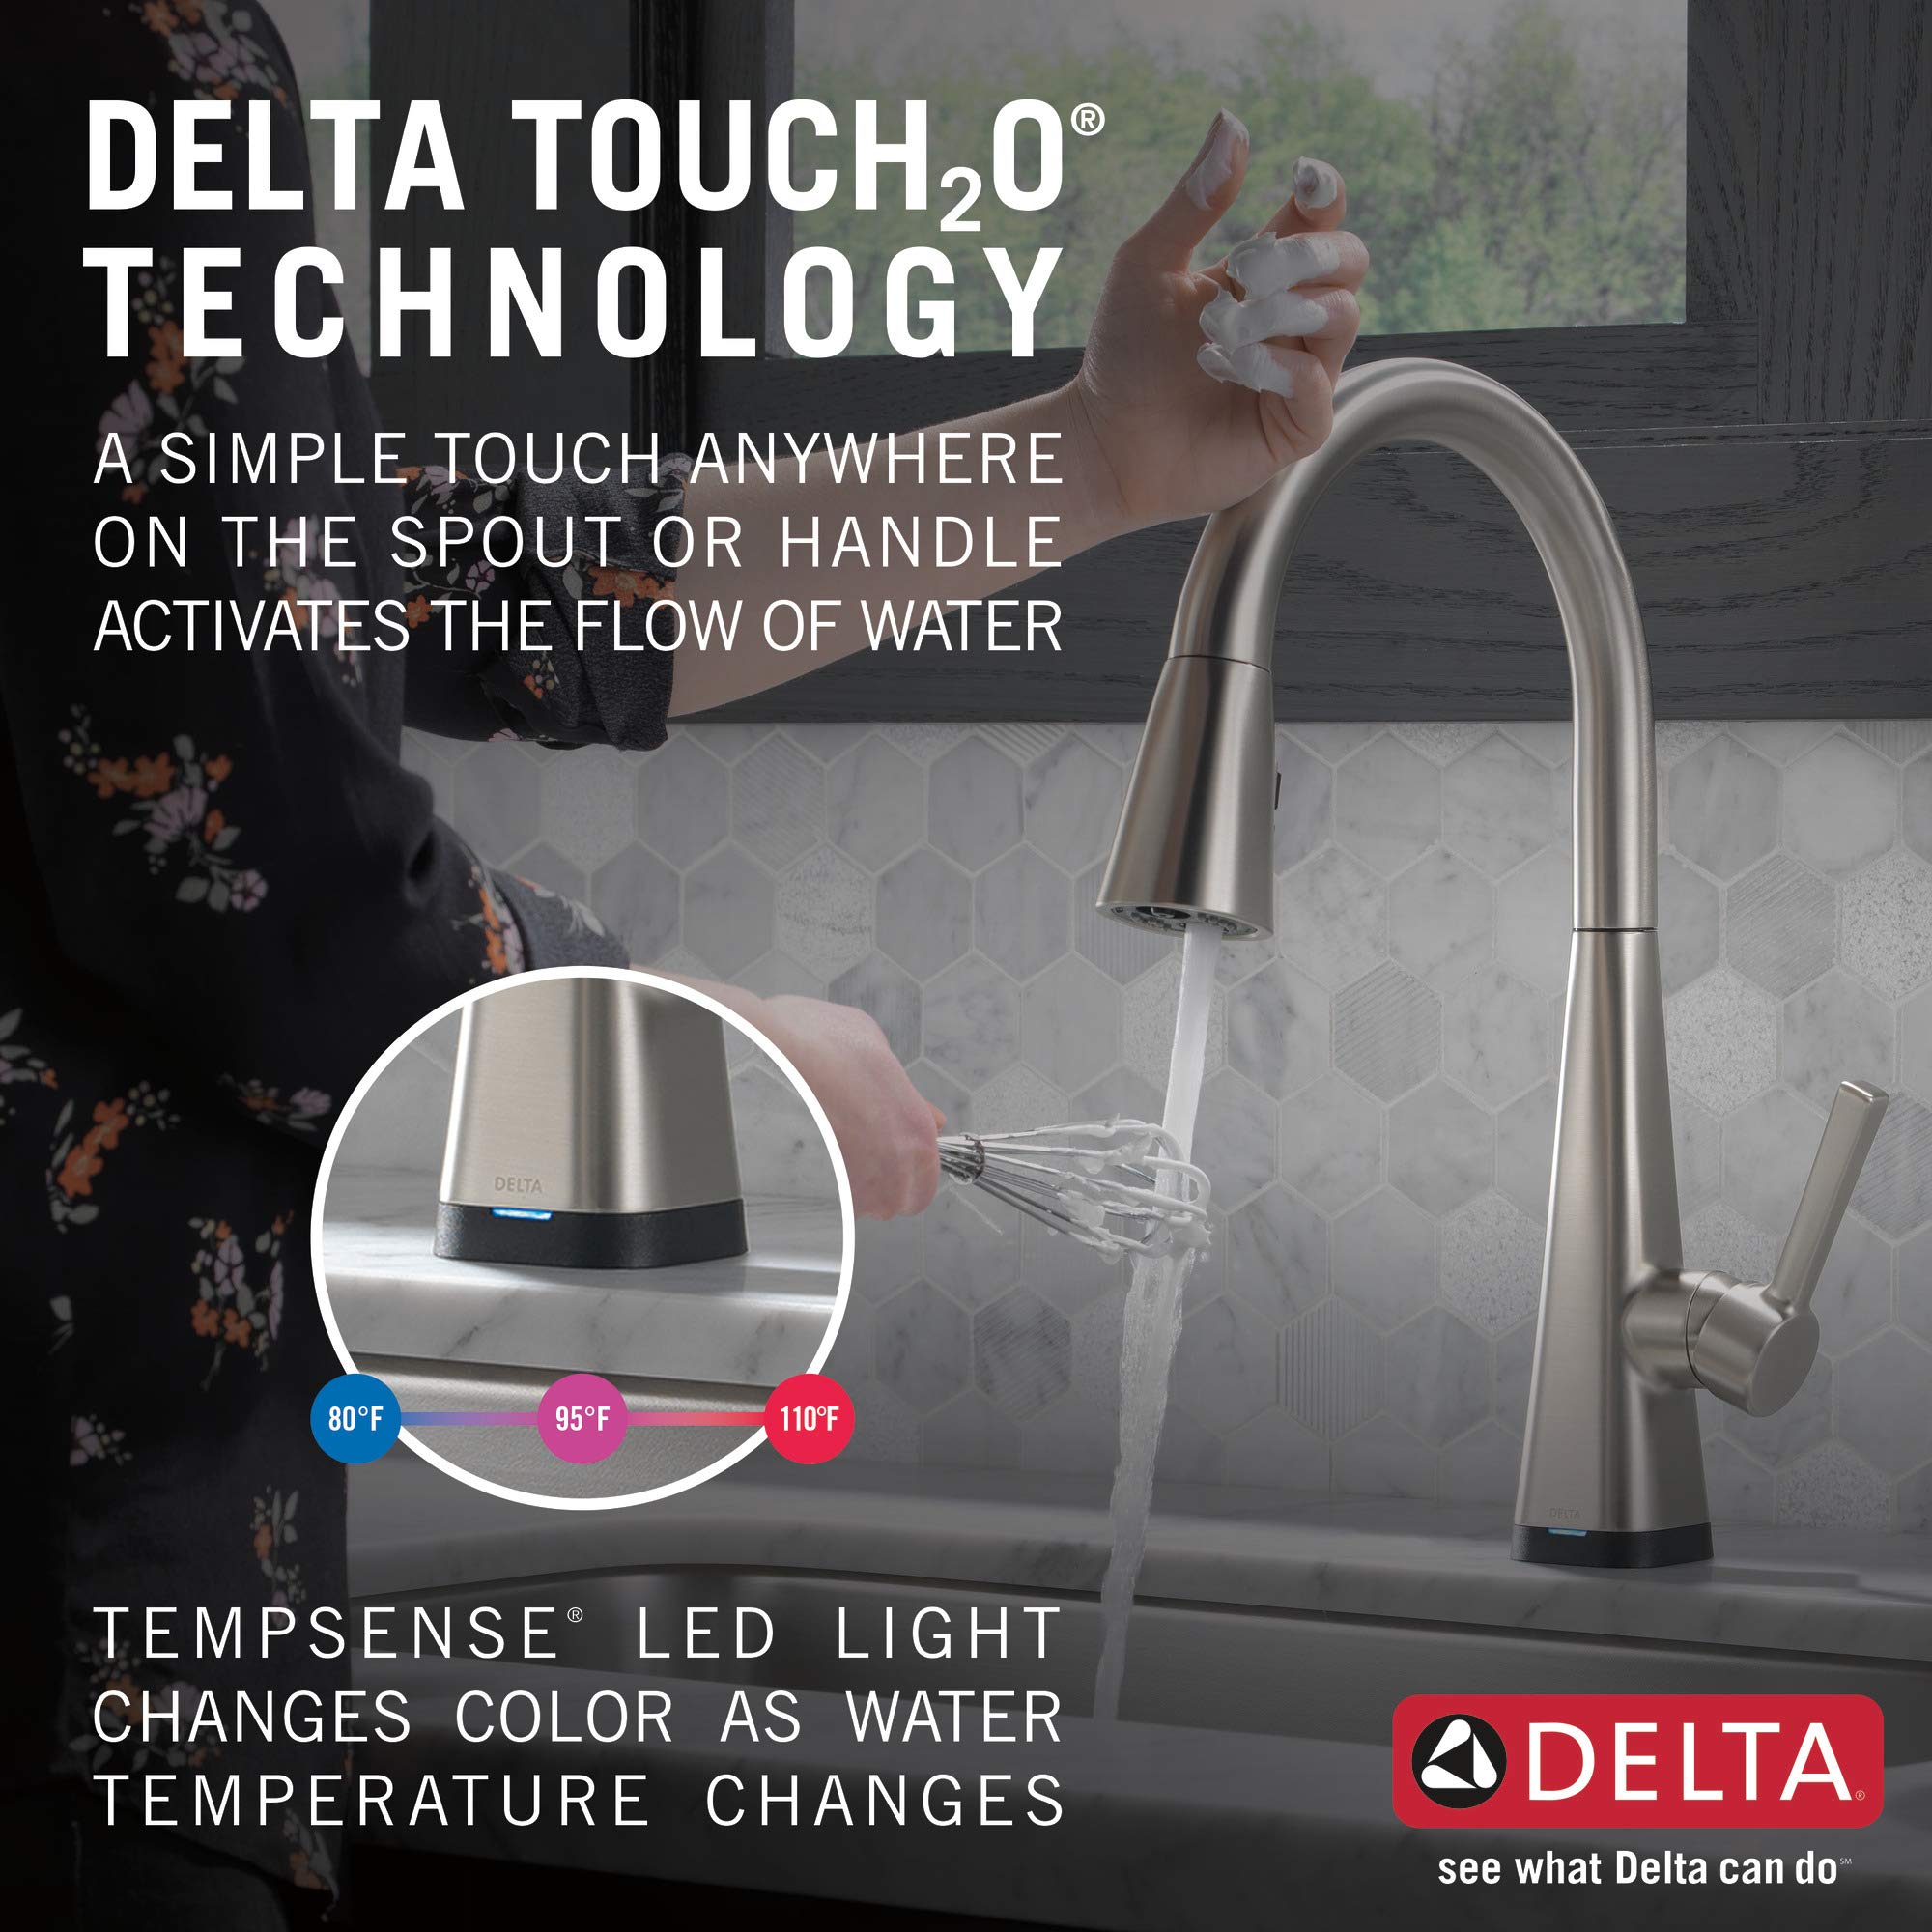 Delta Faucet Lenta Touch Kitchen Faucet Brushed Nickel, Kitchen Faucets with Pull Down Sprayer, Kitchen Sink Faucet, Faucet for Kitchen Sink, Touch2O Technology, SpotShield Stainless 19802TZ-SP-DST